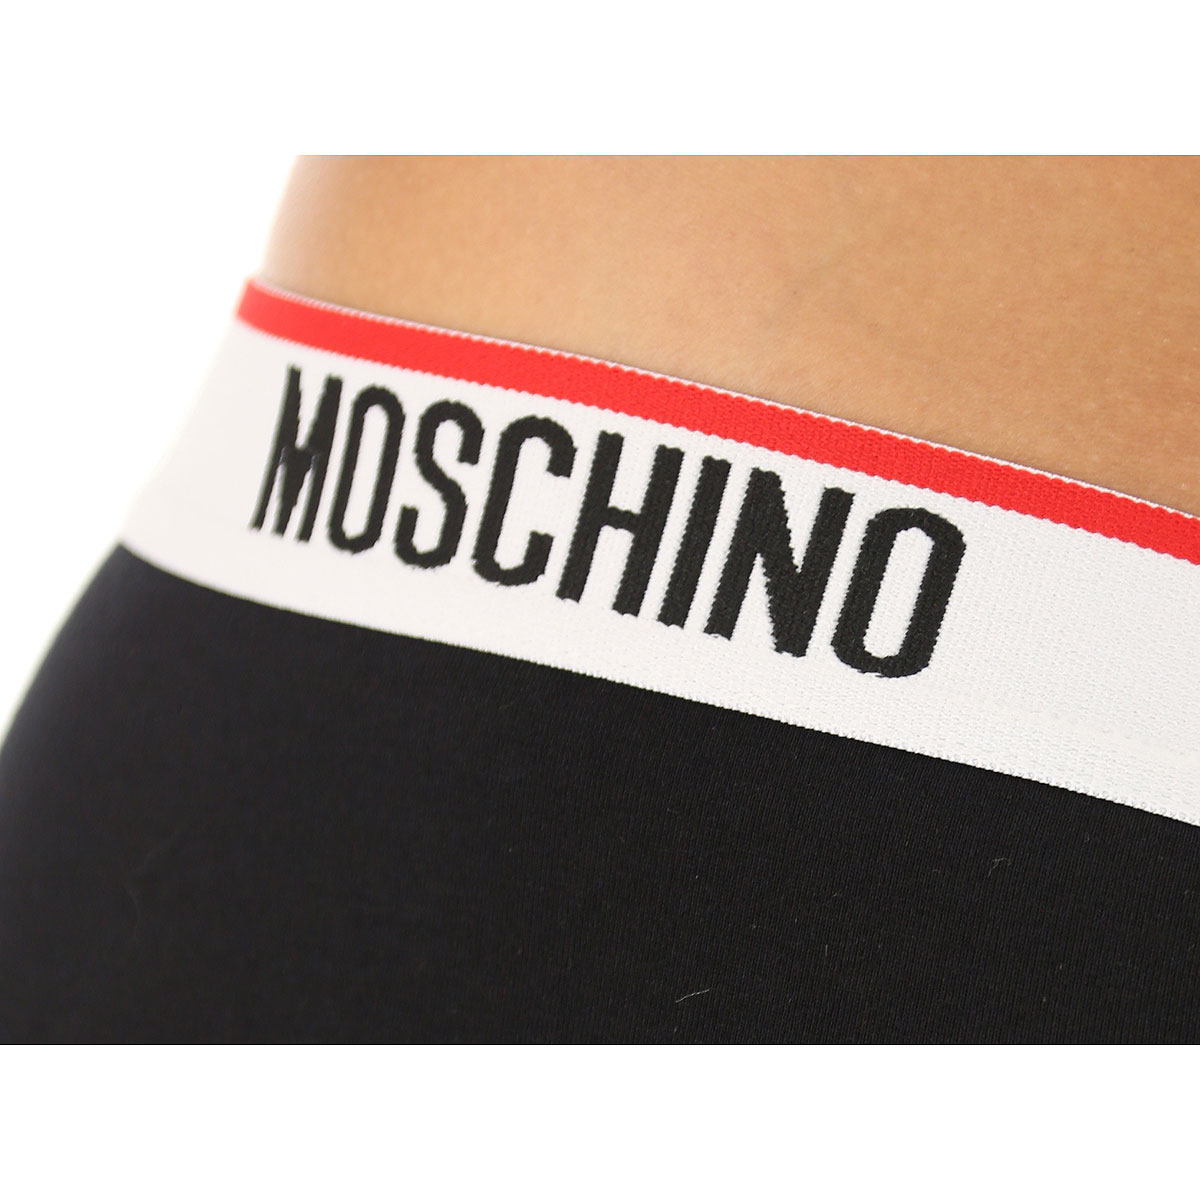 Mens Underwear Moschino, Style code: cont-a4703-5670